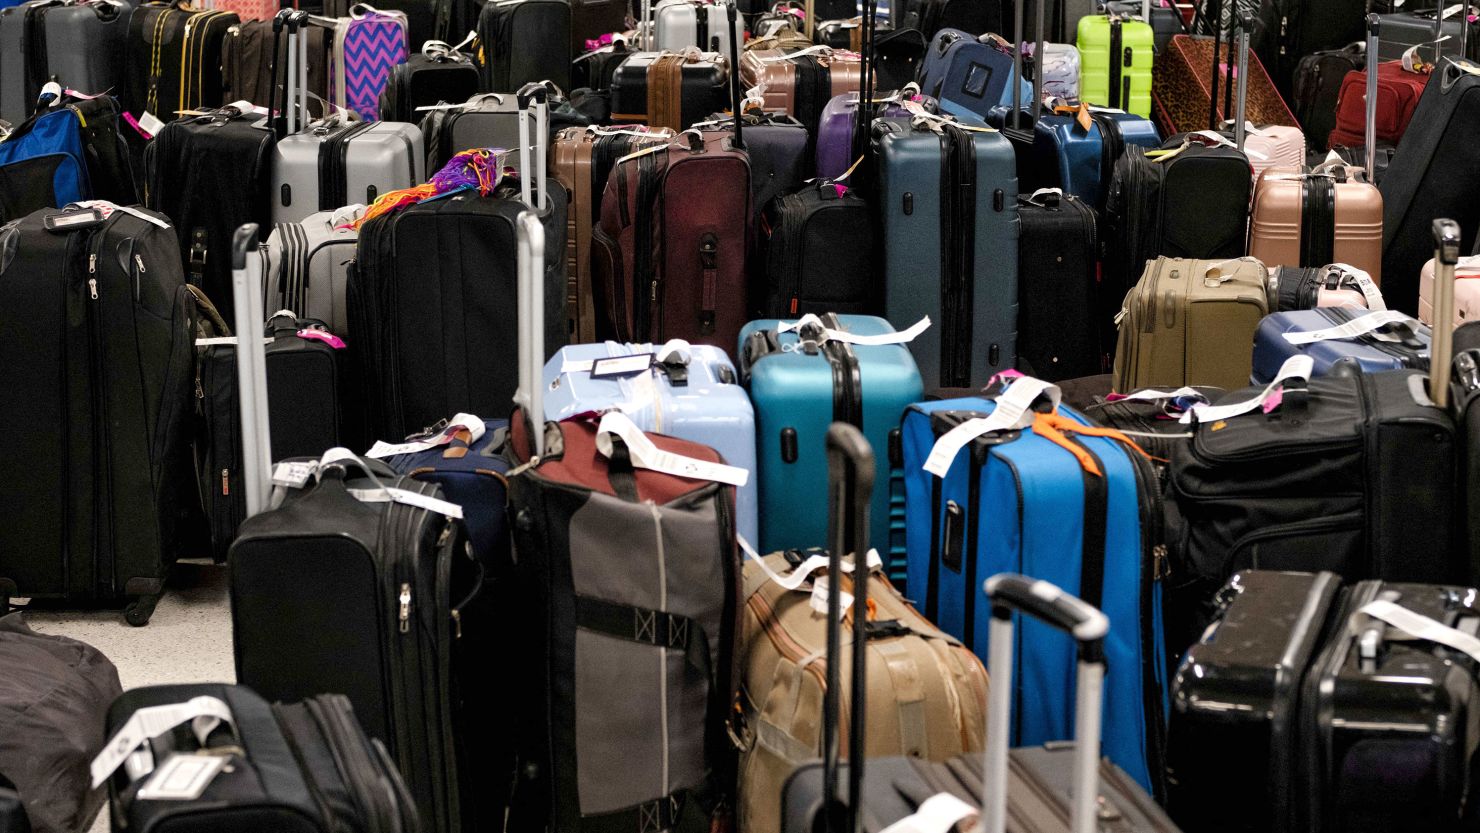 Hundreds of unclaimed suitcases sit near the Southwest Airlines baggage claim area at Nashville International Airport after the airline cancelled thousands of flights in Nashville, Tennessee, on December 27, 2022. - Temperatures were expected to moderate across the eastern and midwest US on December 27, after days of freezing weather from "the blizzard of the century" left at least 49 dead and caused Christmas travel chaos. (Photo by Seth Herald / AFP) (Photo by SETH HERALD/AFP via Getty Images)